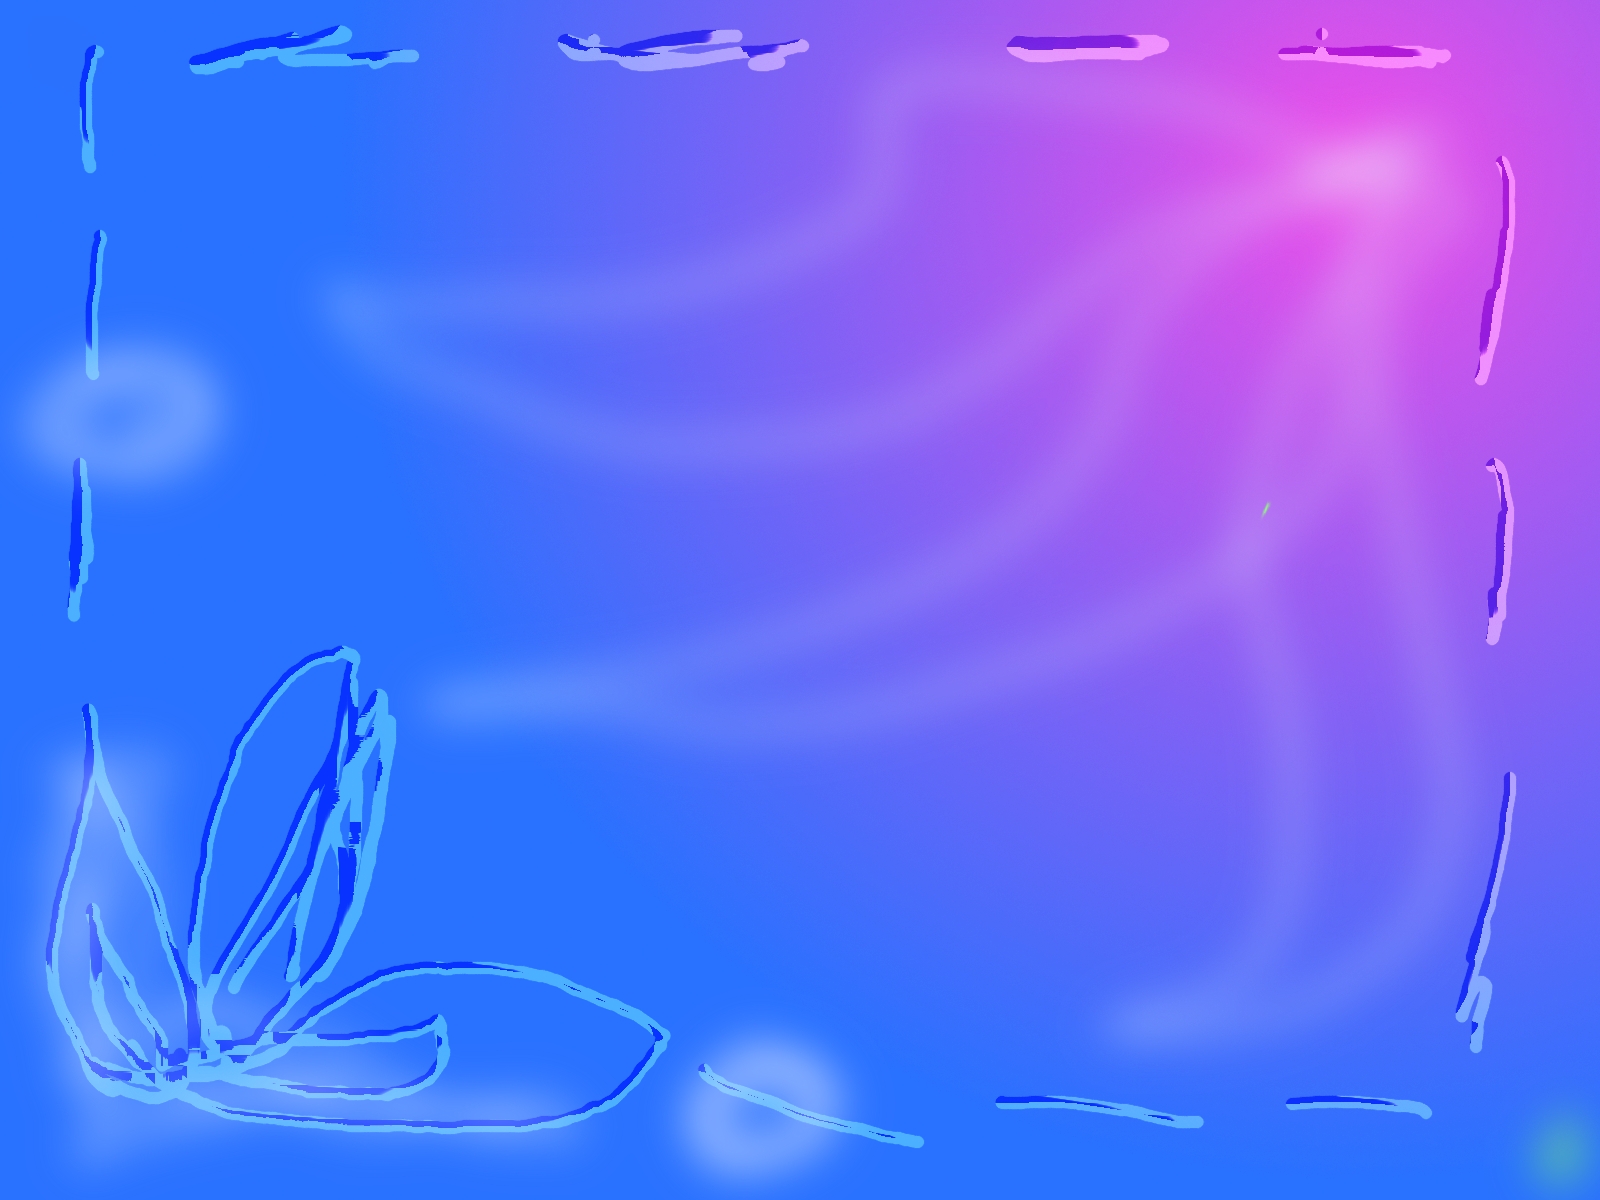 Pink And Blue Background Digital Art By Mira Arguelles Of Jade